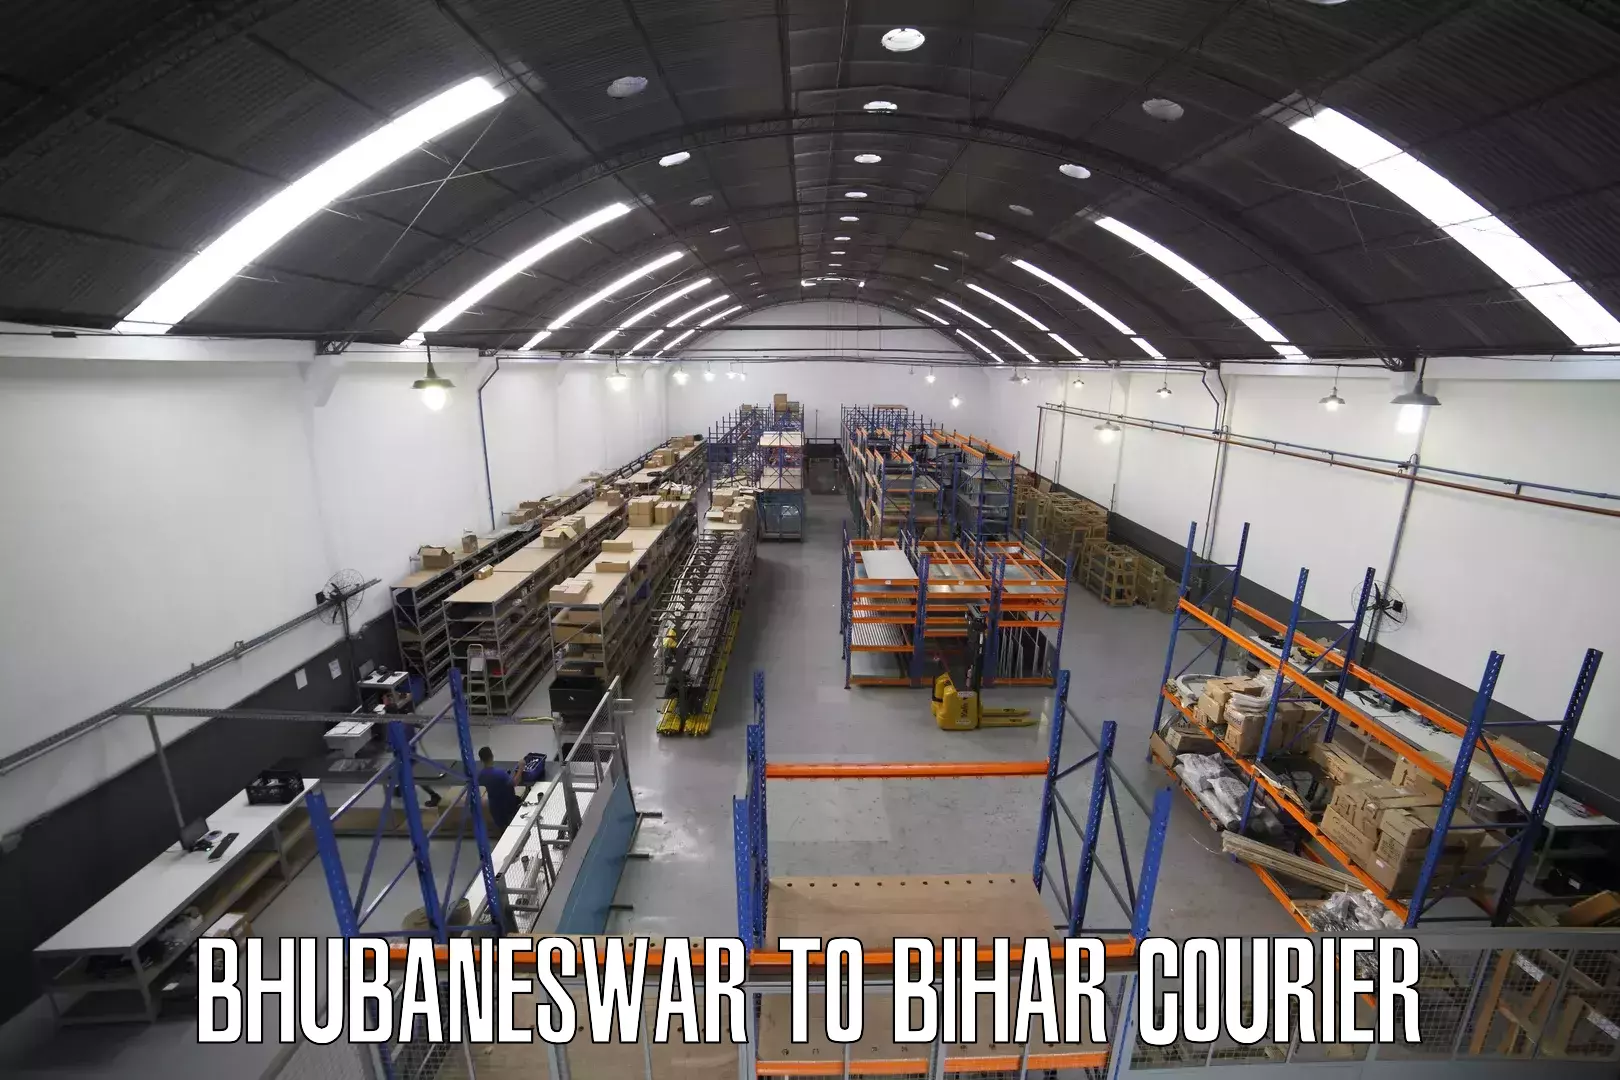 State-of-the-art courier technology Bhubaneswar to Bihar